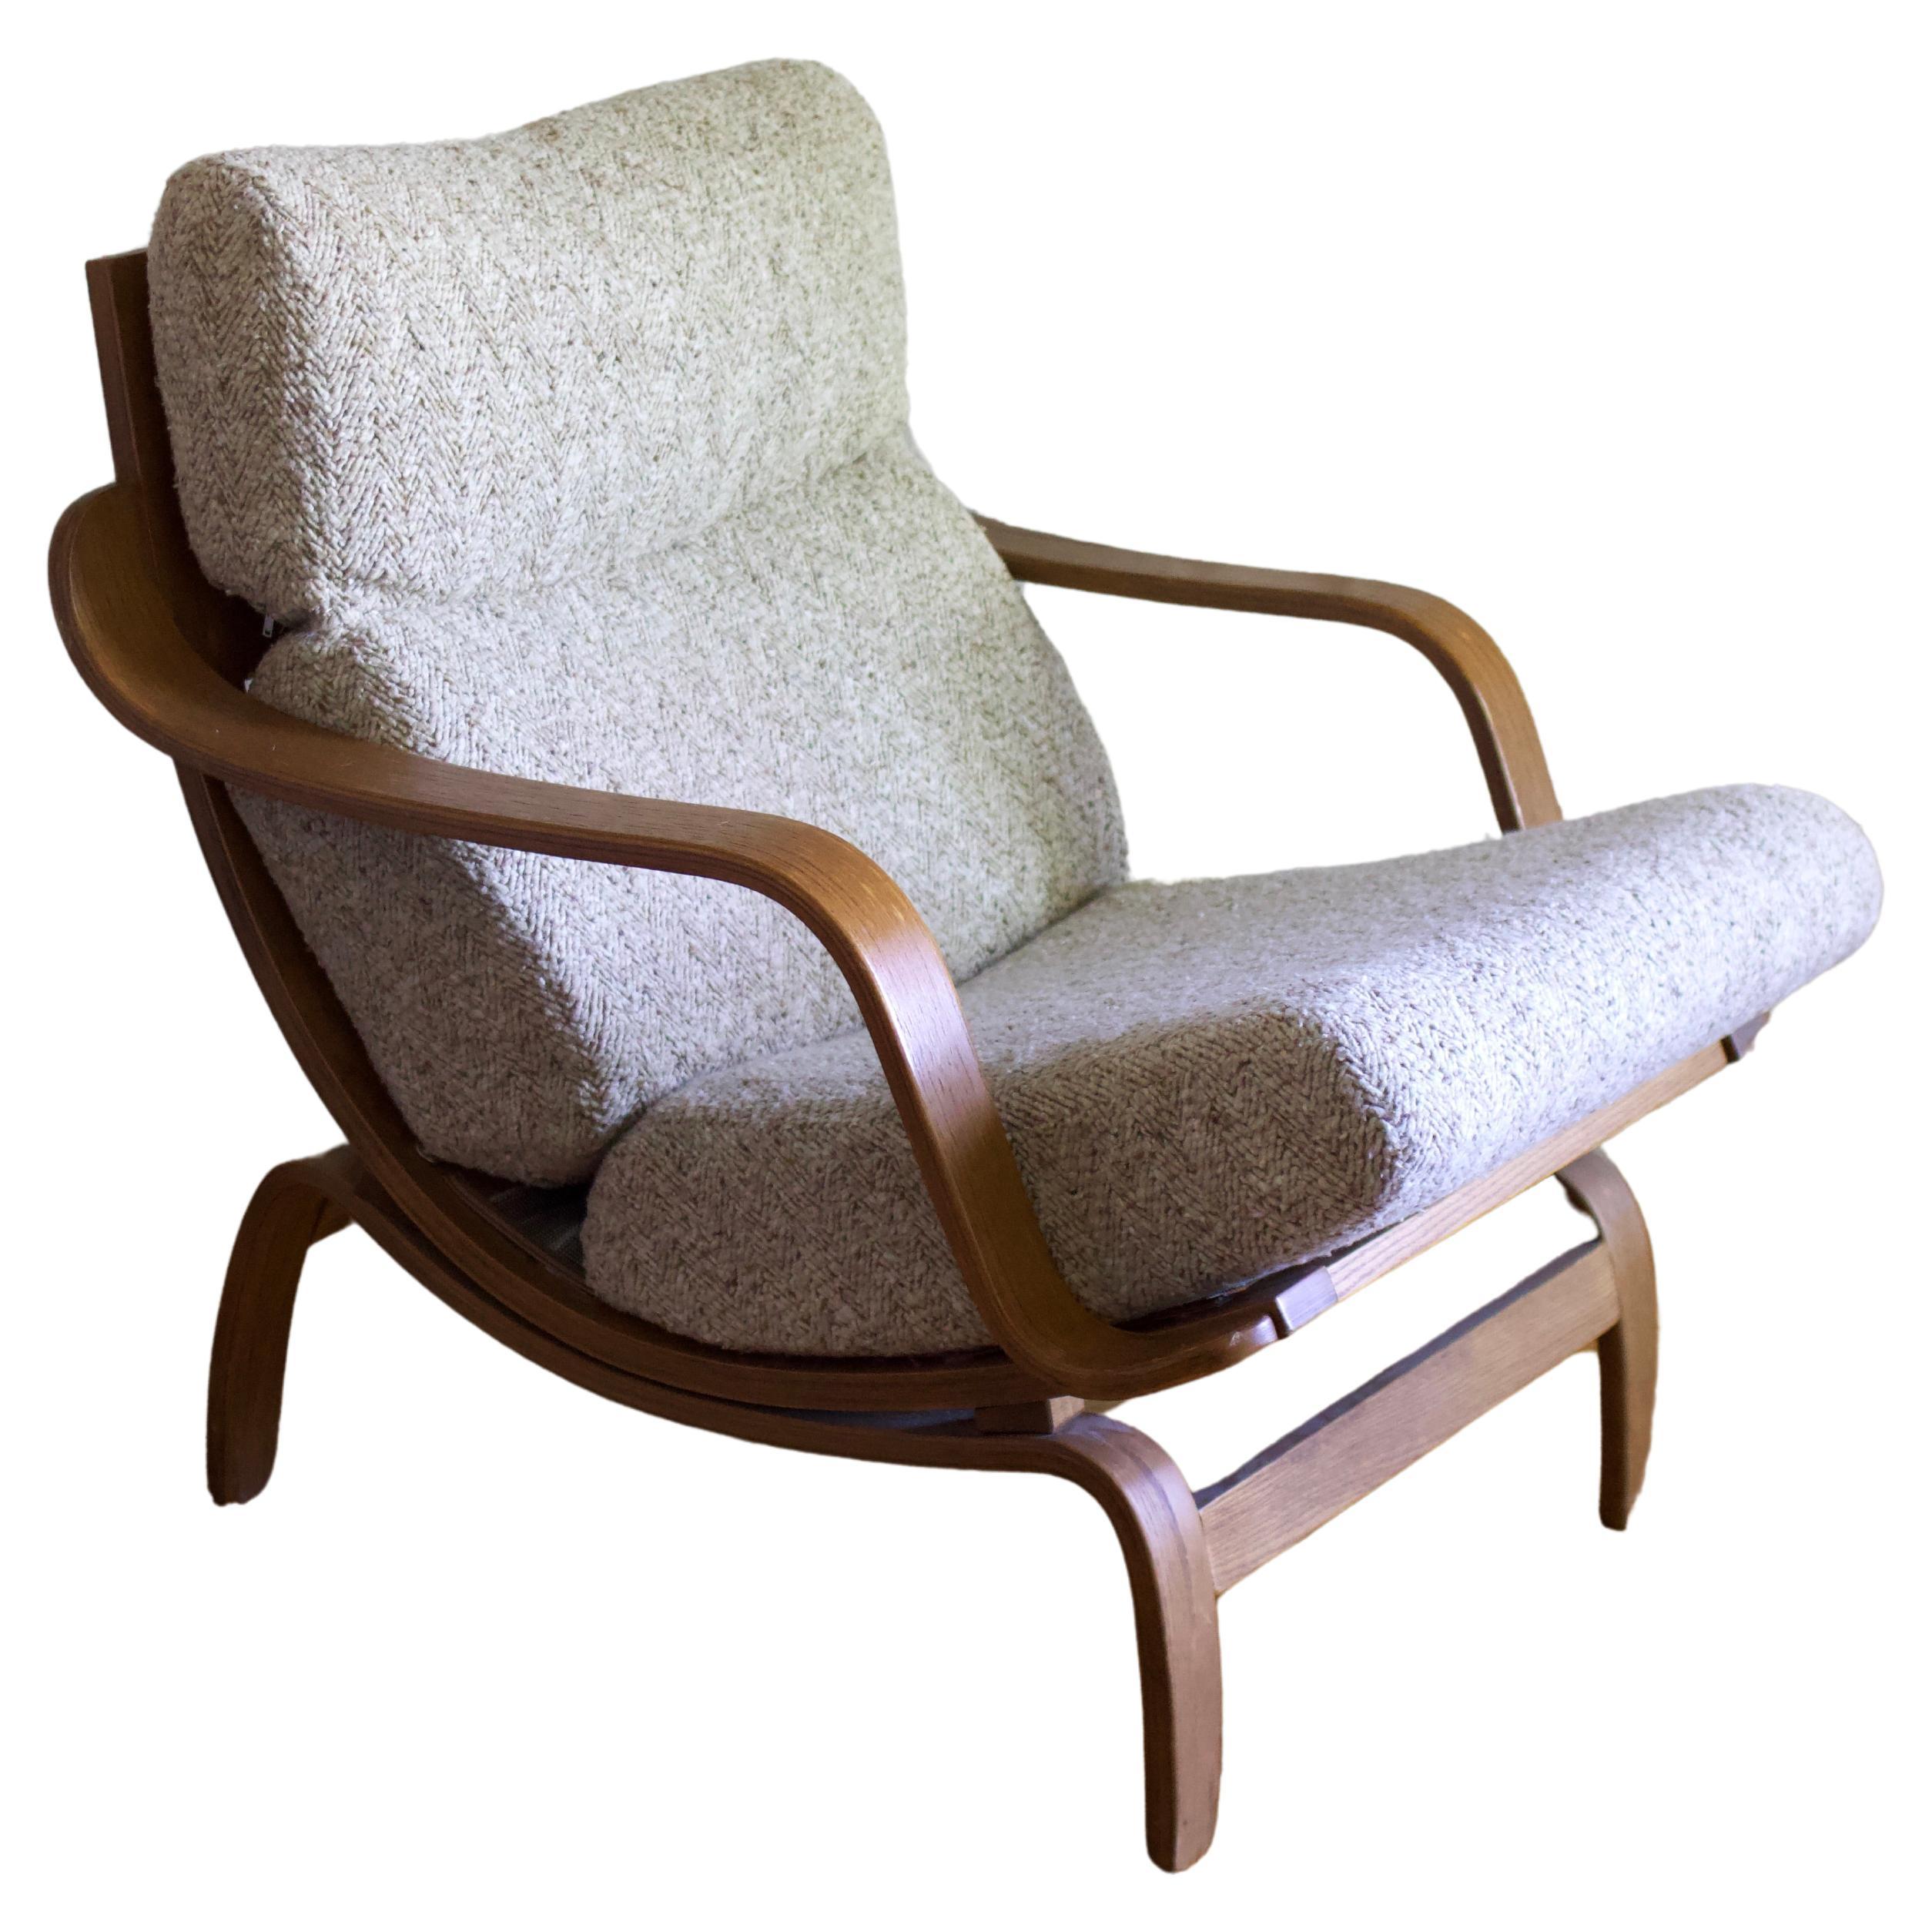 Mid-century modern bentwood Orbit lounge chair and ottoman by Charlton Company (Leominster, MA) for their Century 21 collection. Original woven cream upholstery rests atop curved, warm-toned bentwood. 

Dimensions: 27 1/2